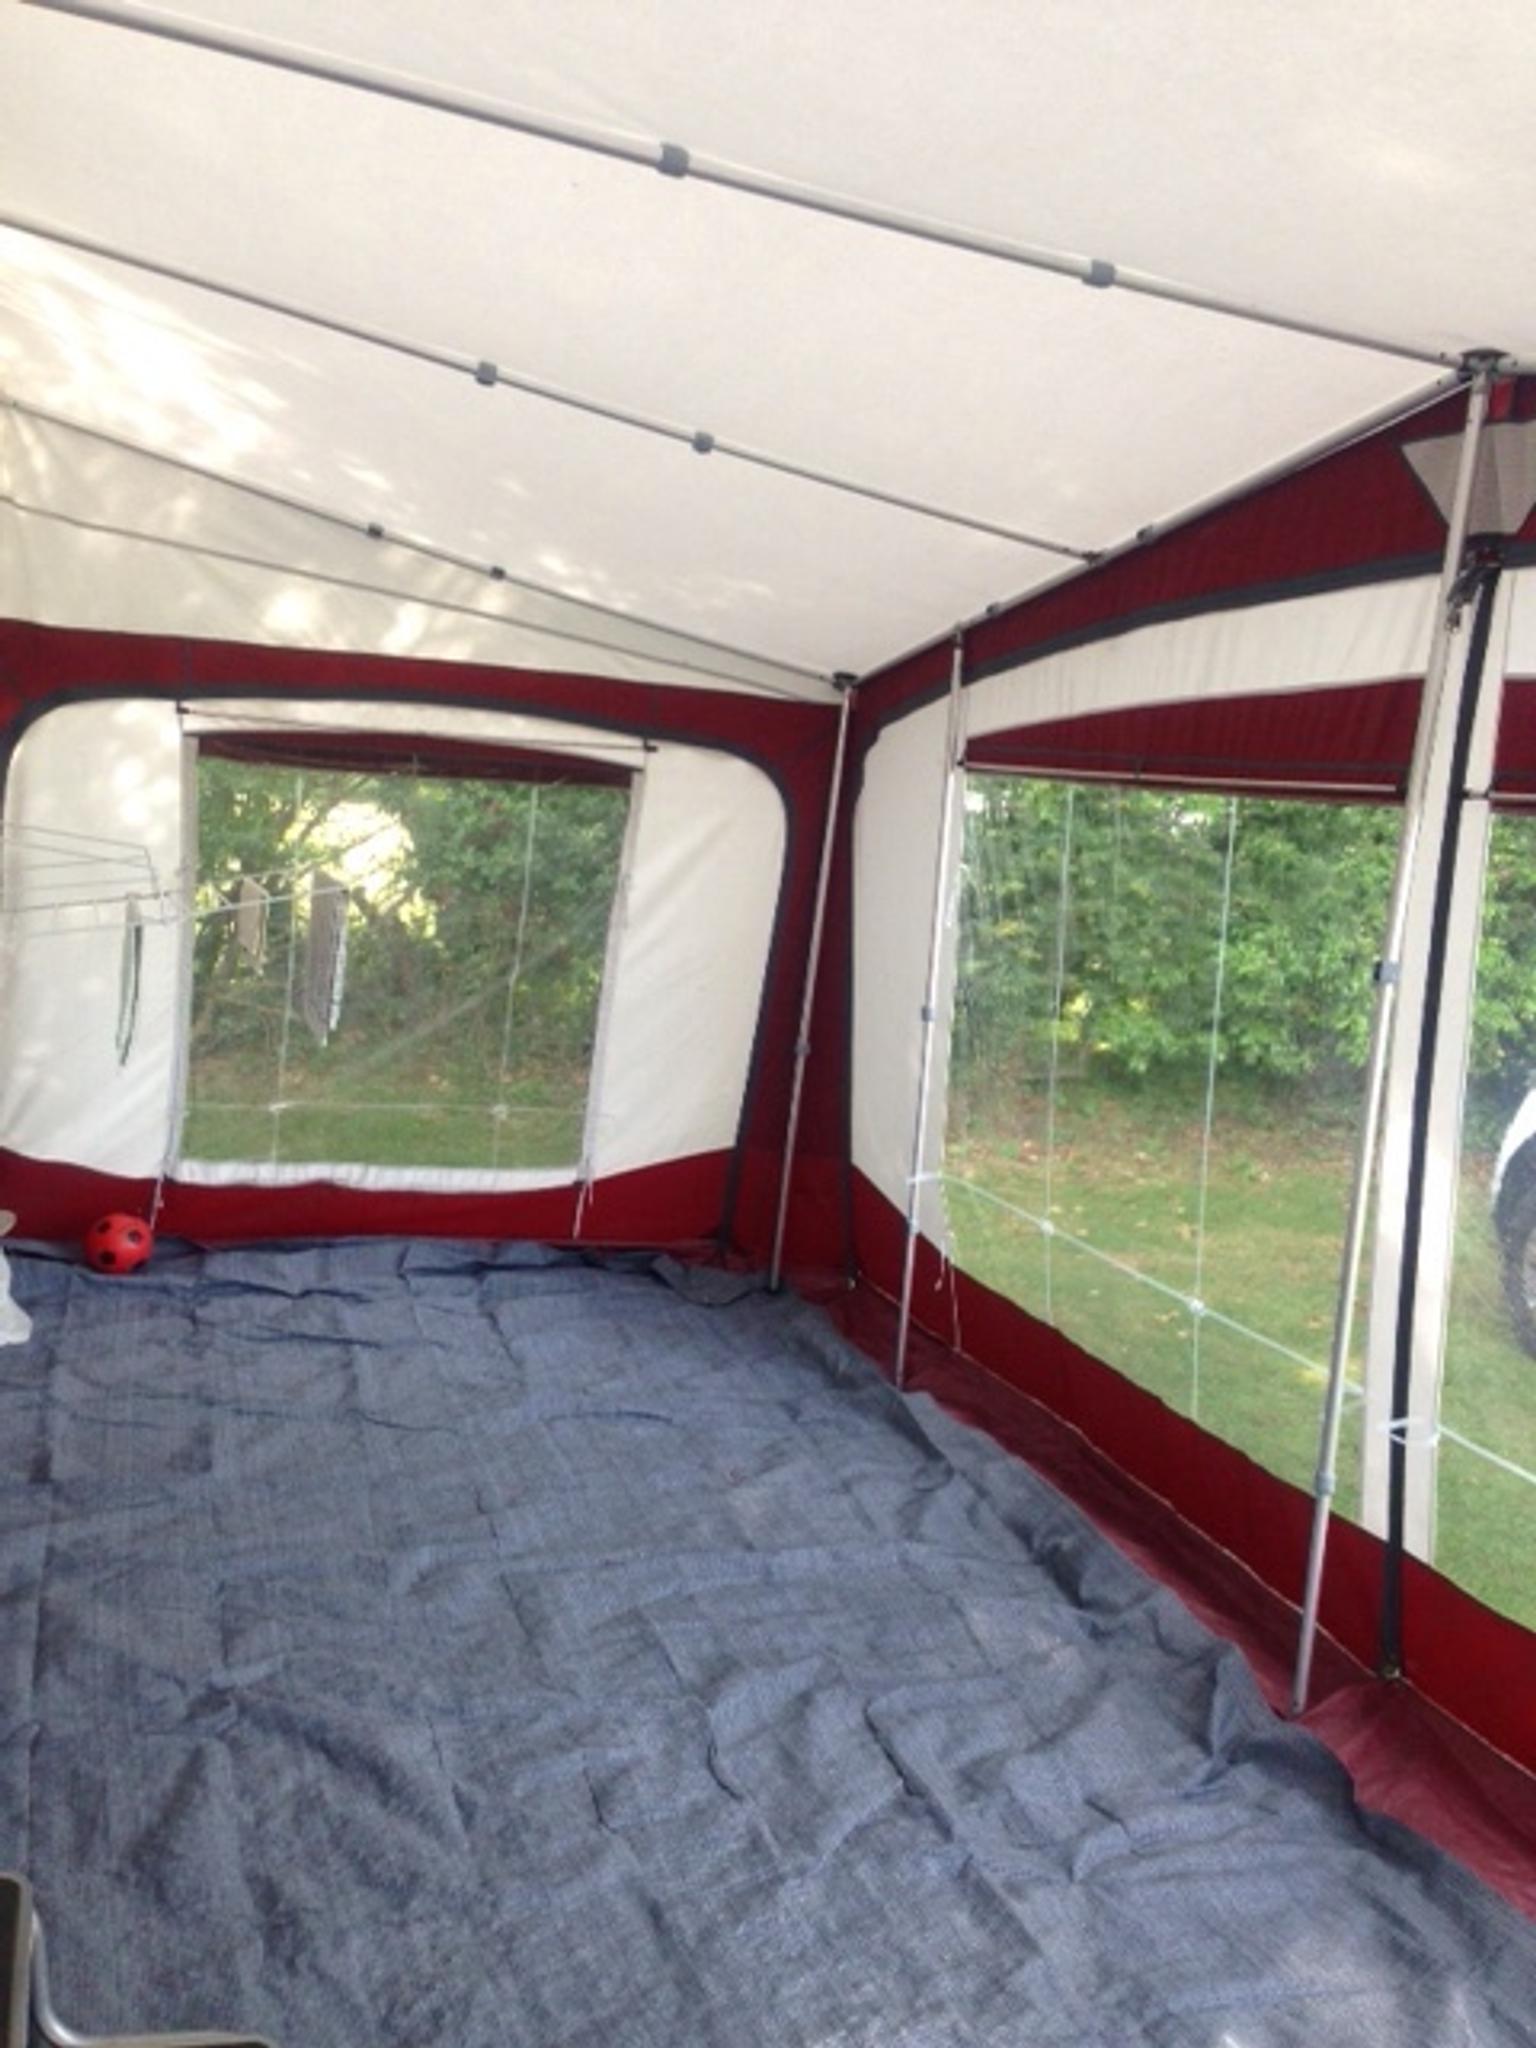 Caravan Awning Bradcot 990 Cm In Wine In Doncaster For 80 00 For Sale Shpock